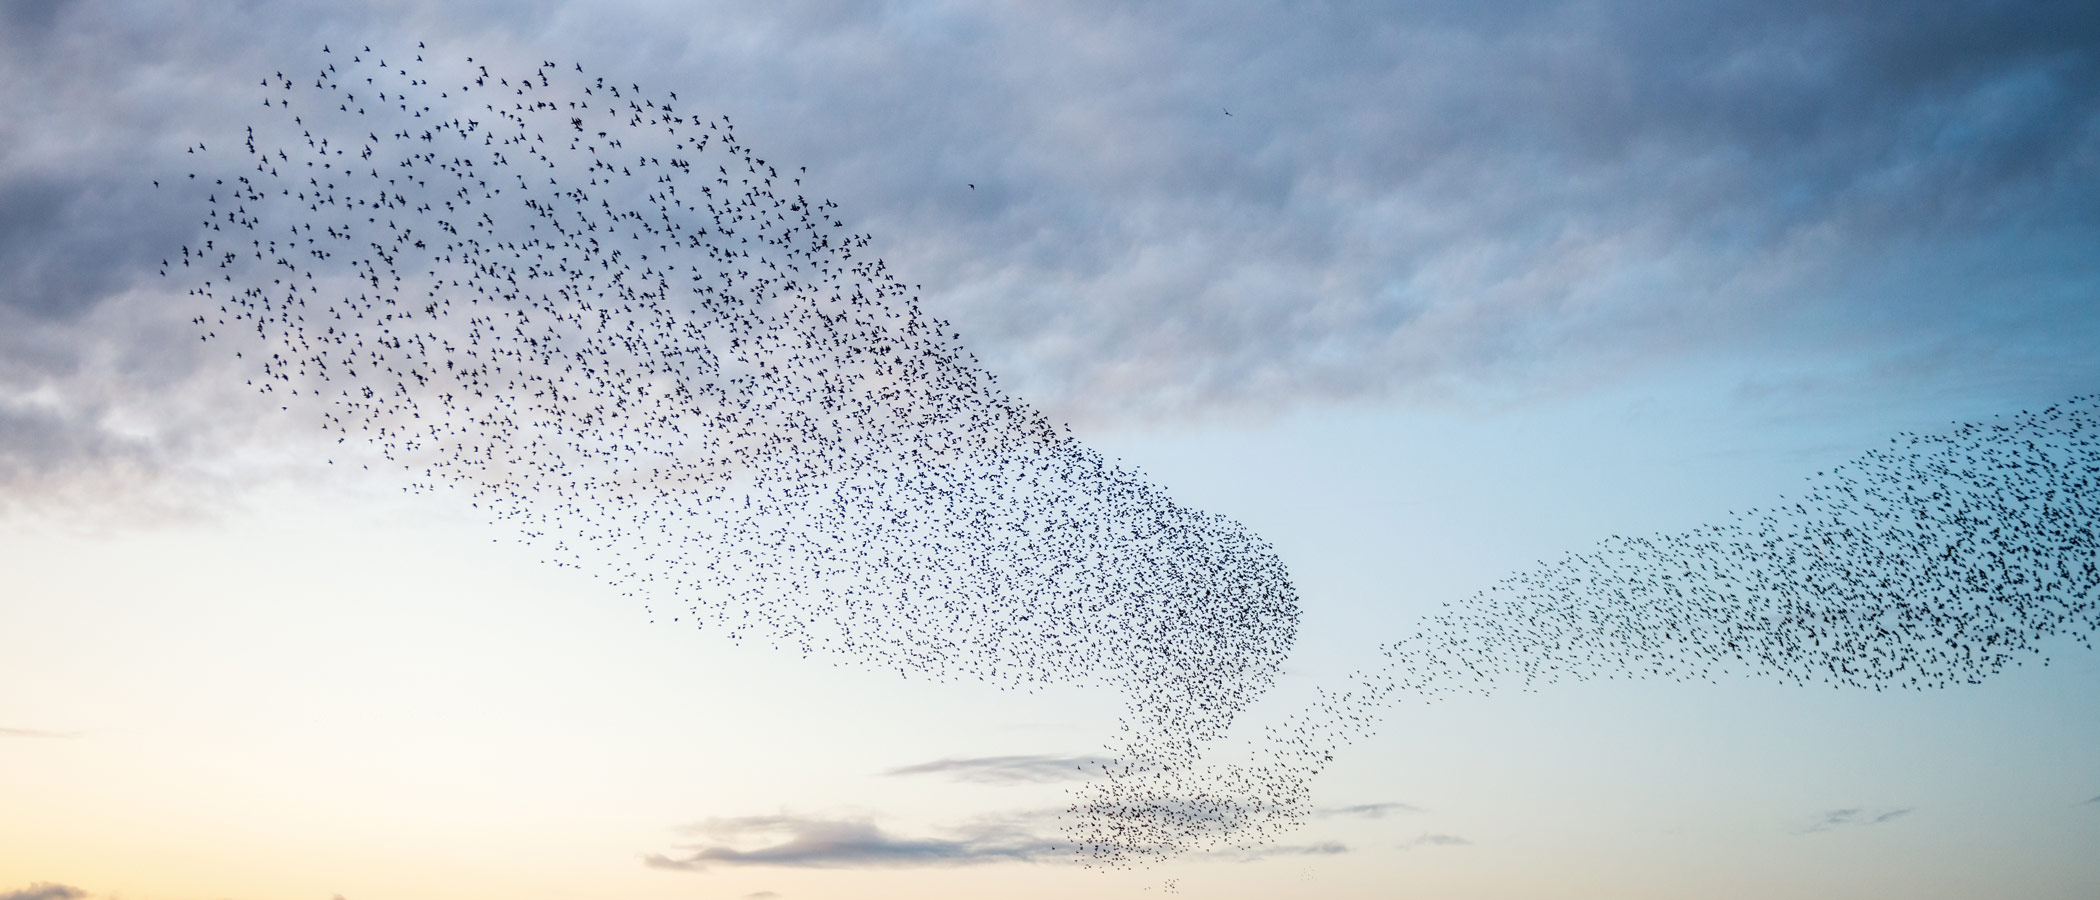 Birds flying together as a flock